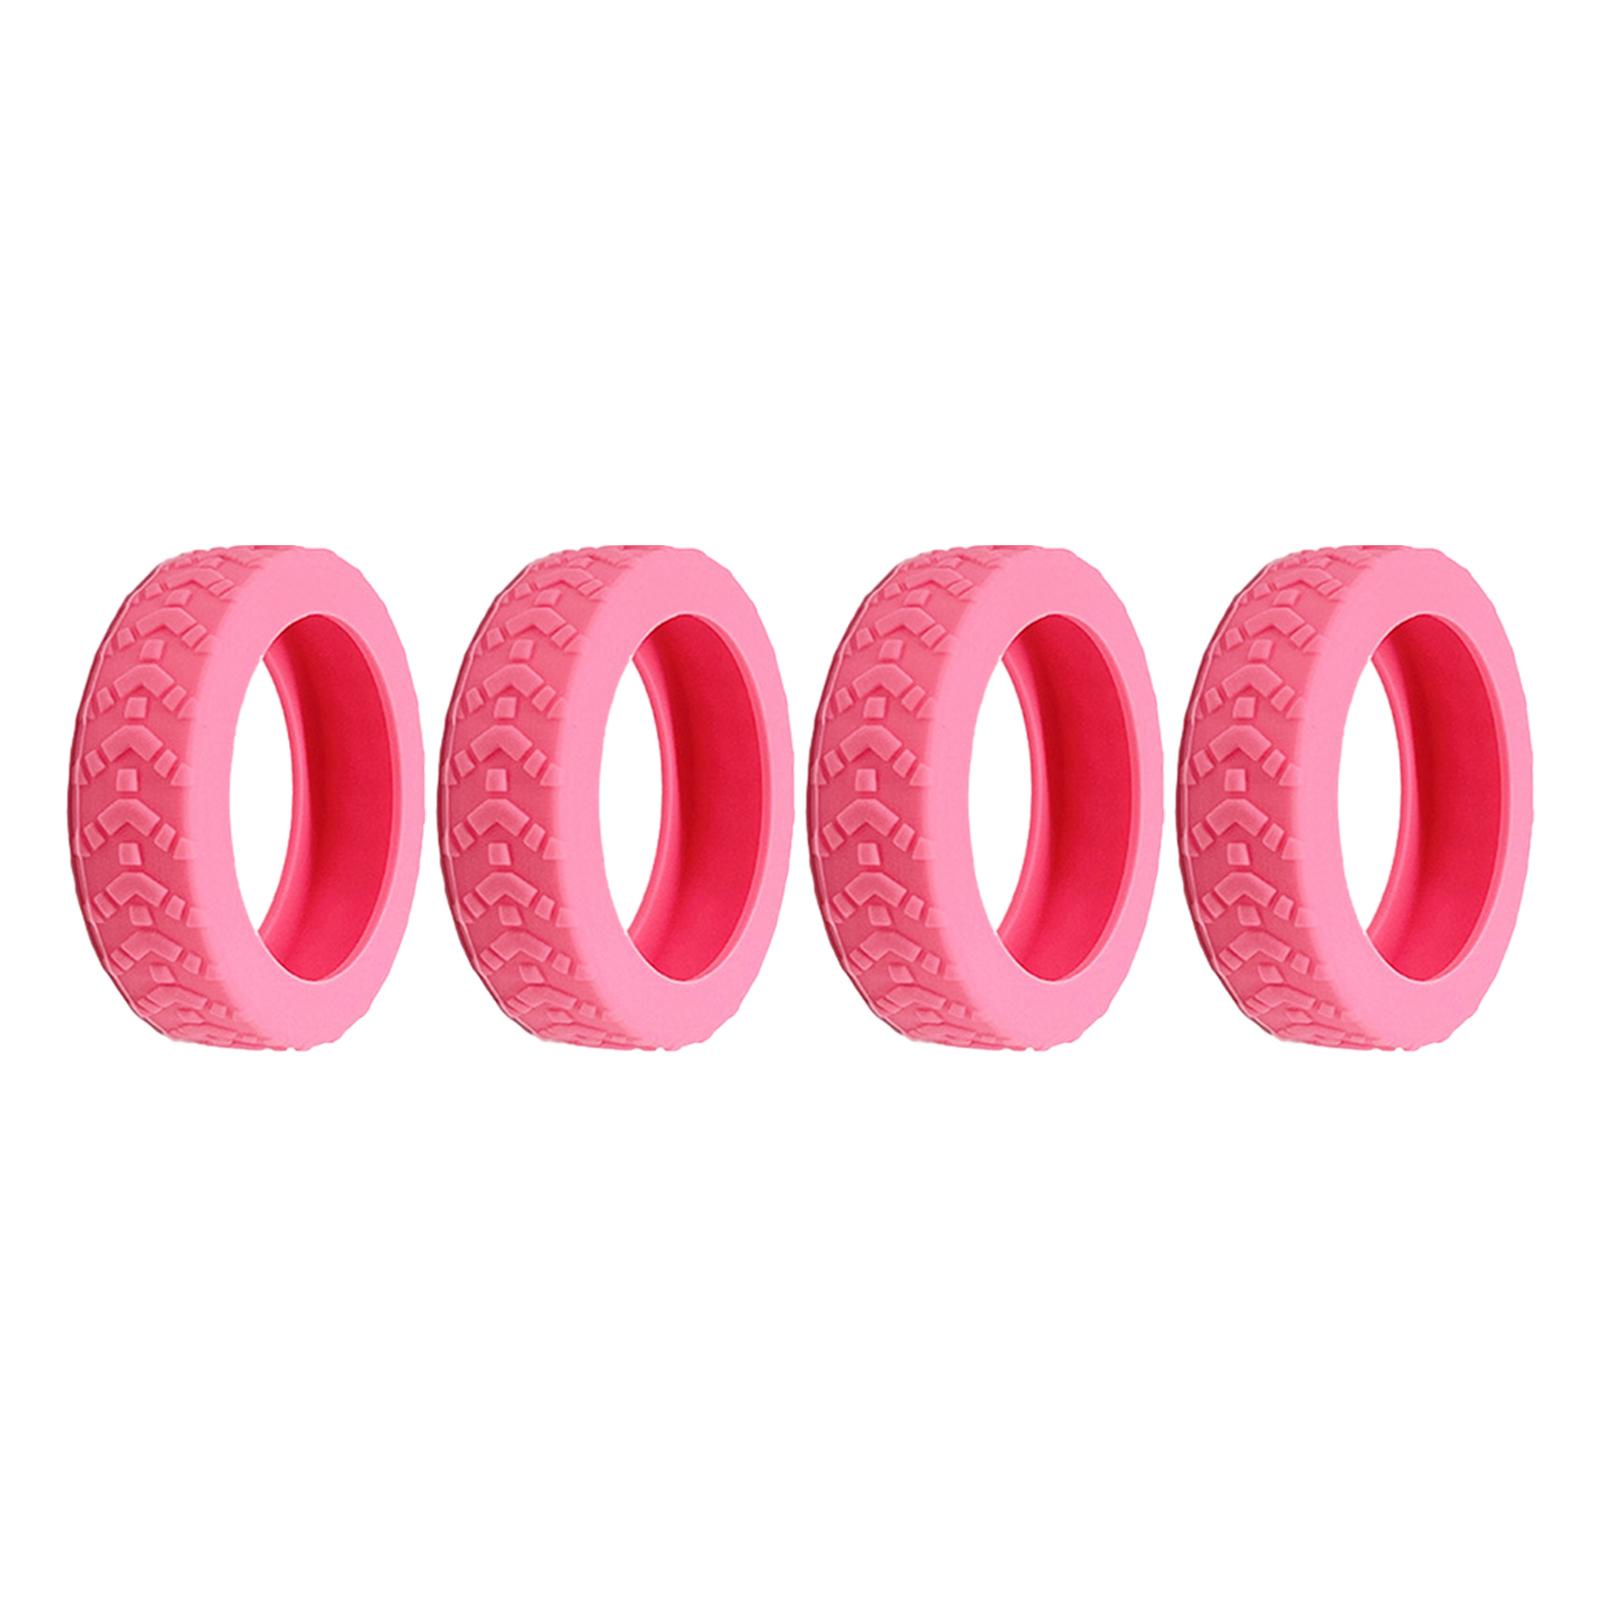 4 Pieces Luggage Wheels Covers Replace Parts Silicone Suitcase Wheels Covers Pink